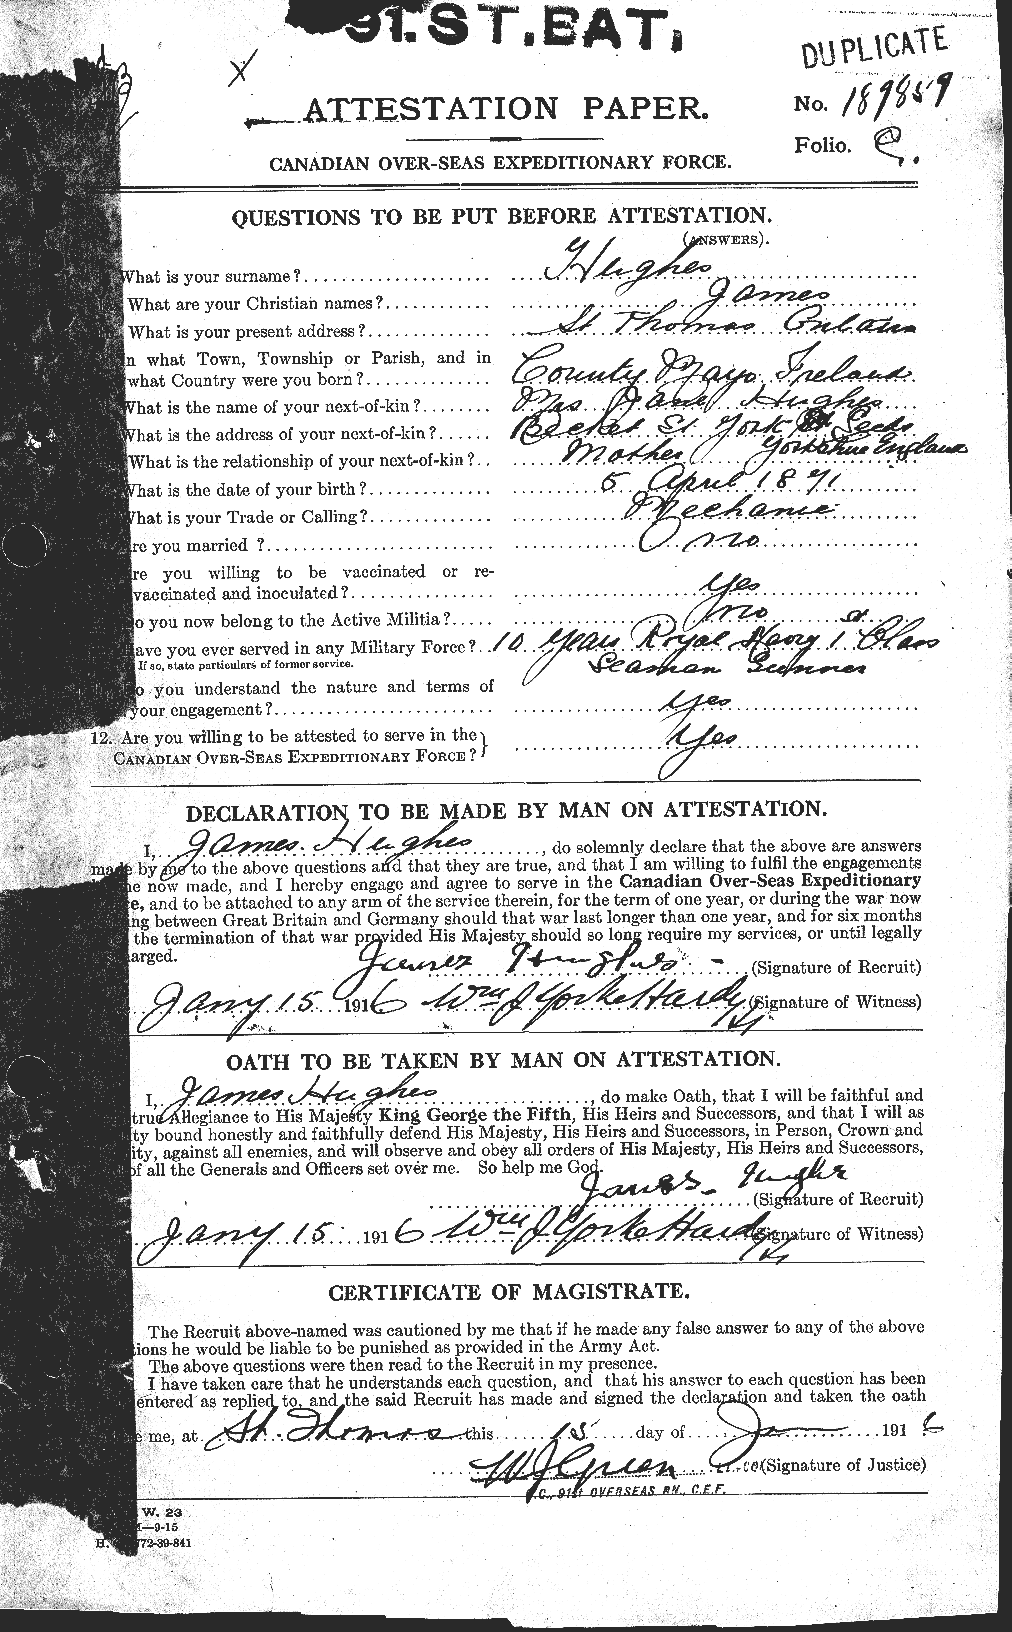 Personnel Records of the First World War - CEF 403946a